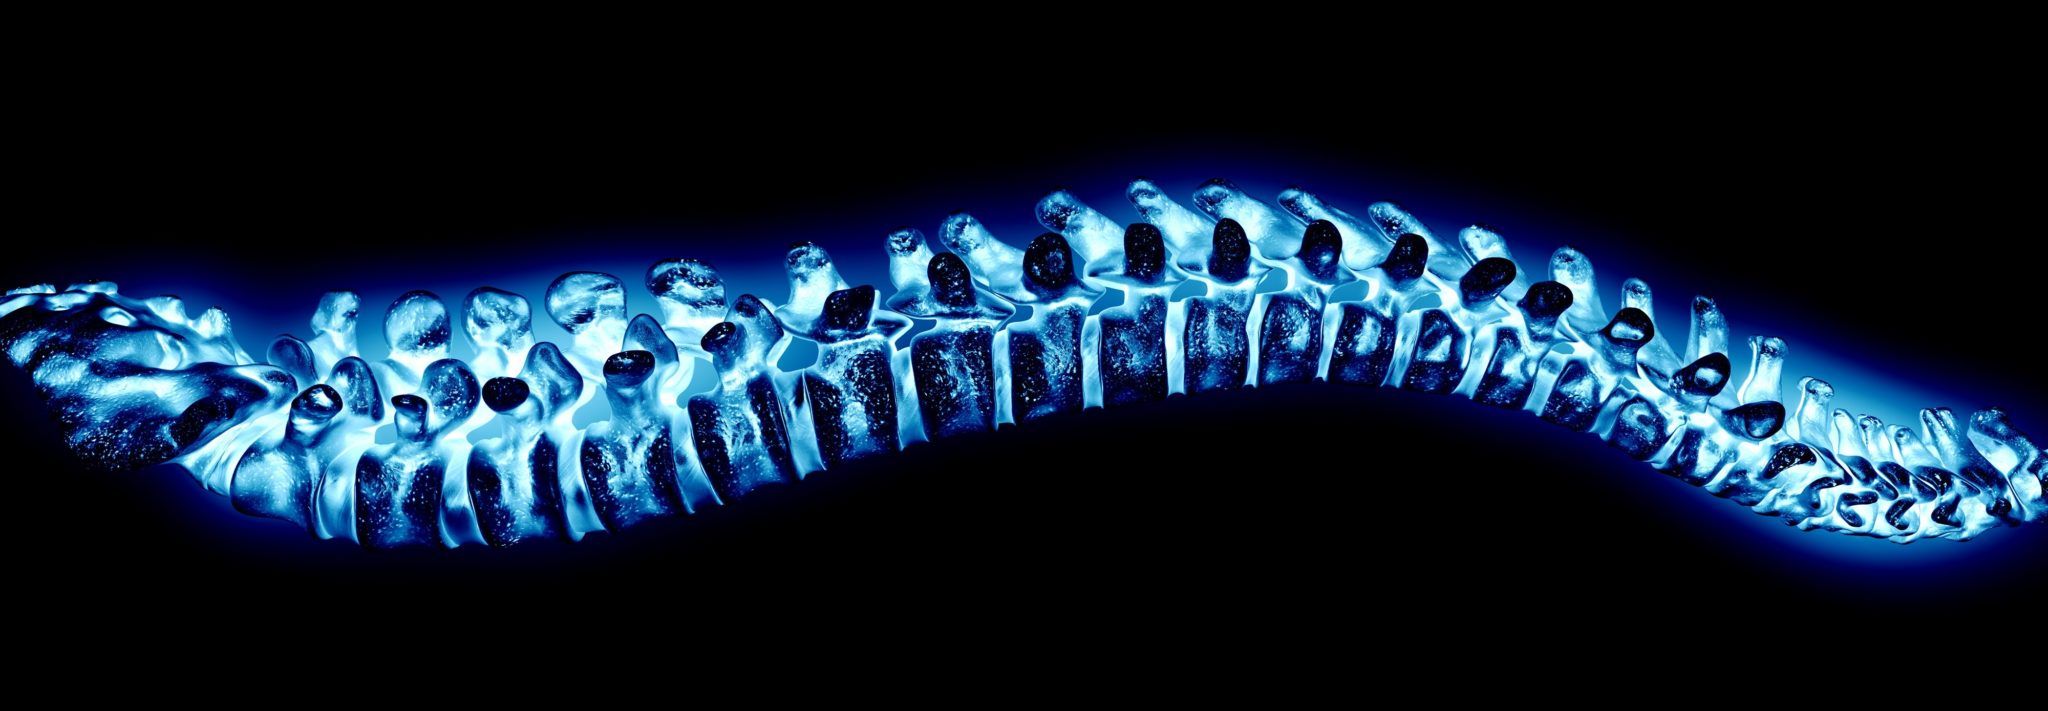 Illustration showing the vertebrae of the human spine. Copyright Barrow Neurological Institute.